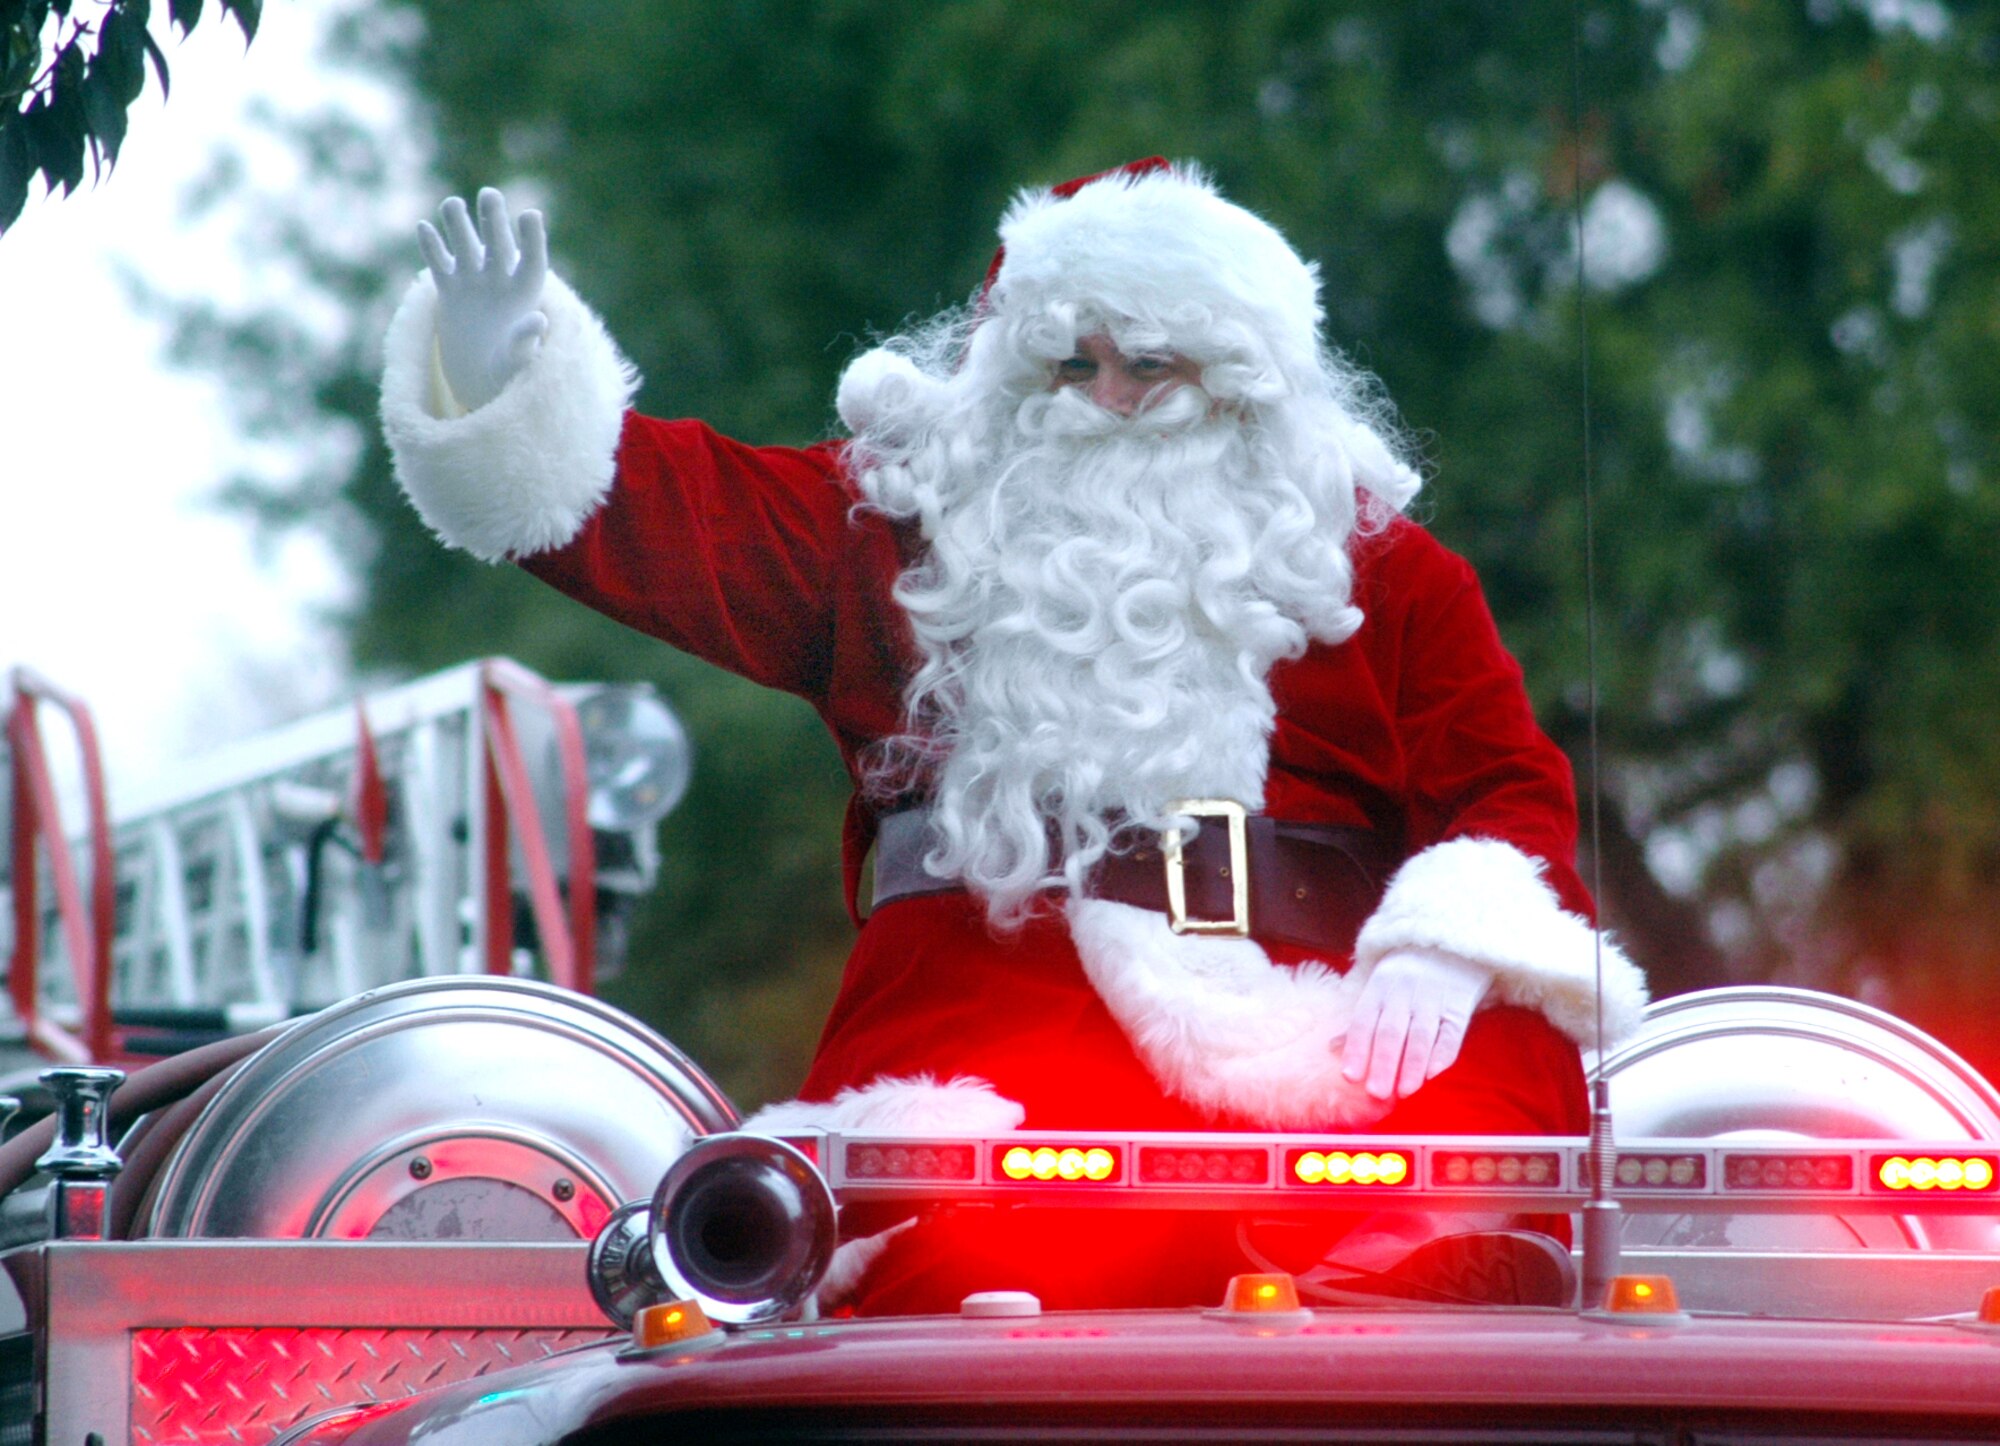 Santa Claus waves to the crowd from atop a fire truck during Perry's "The Magic of Christmas" parade Dec. 6. U. S. Air Force photo by Sue Sapp